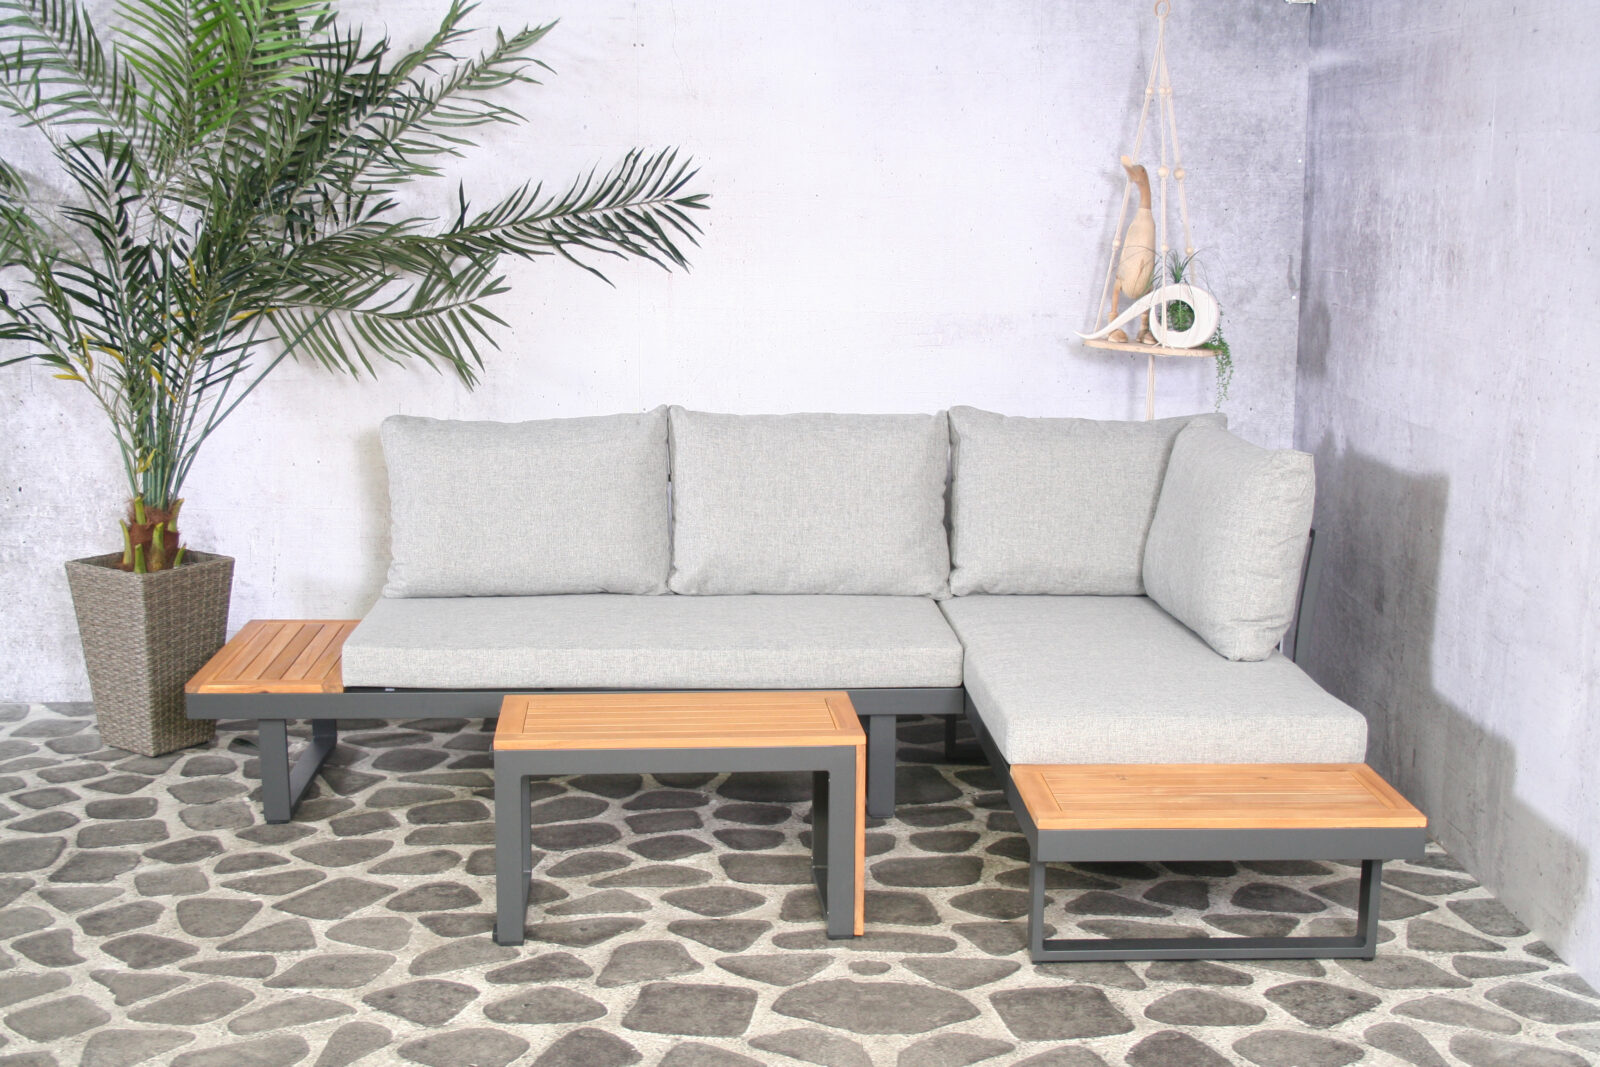 Loungeset Olympia | Multifunctioneel | 4-persoons Olympia loungeset 35130 10 scaled